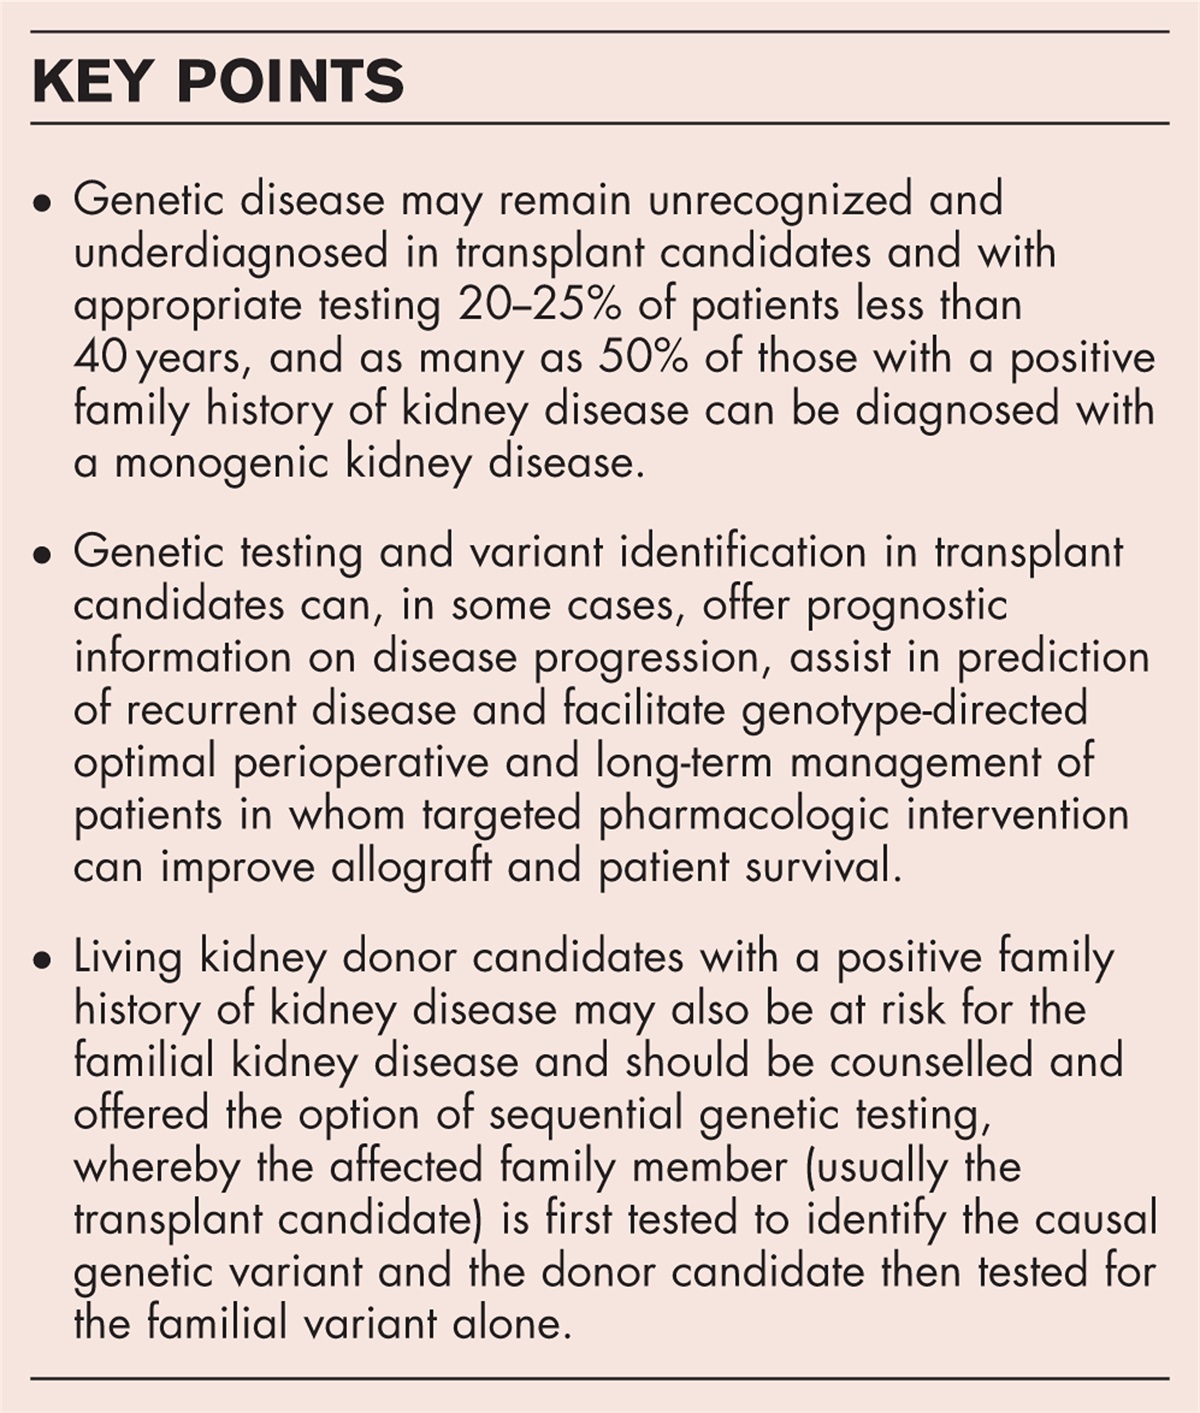 Genetic testing in the evaluation of recipient candidates and living kidney donors